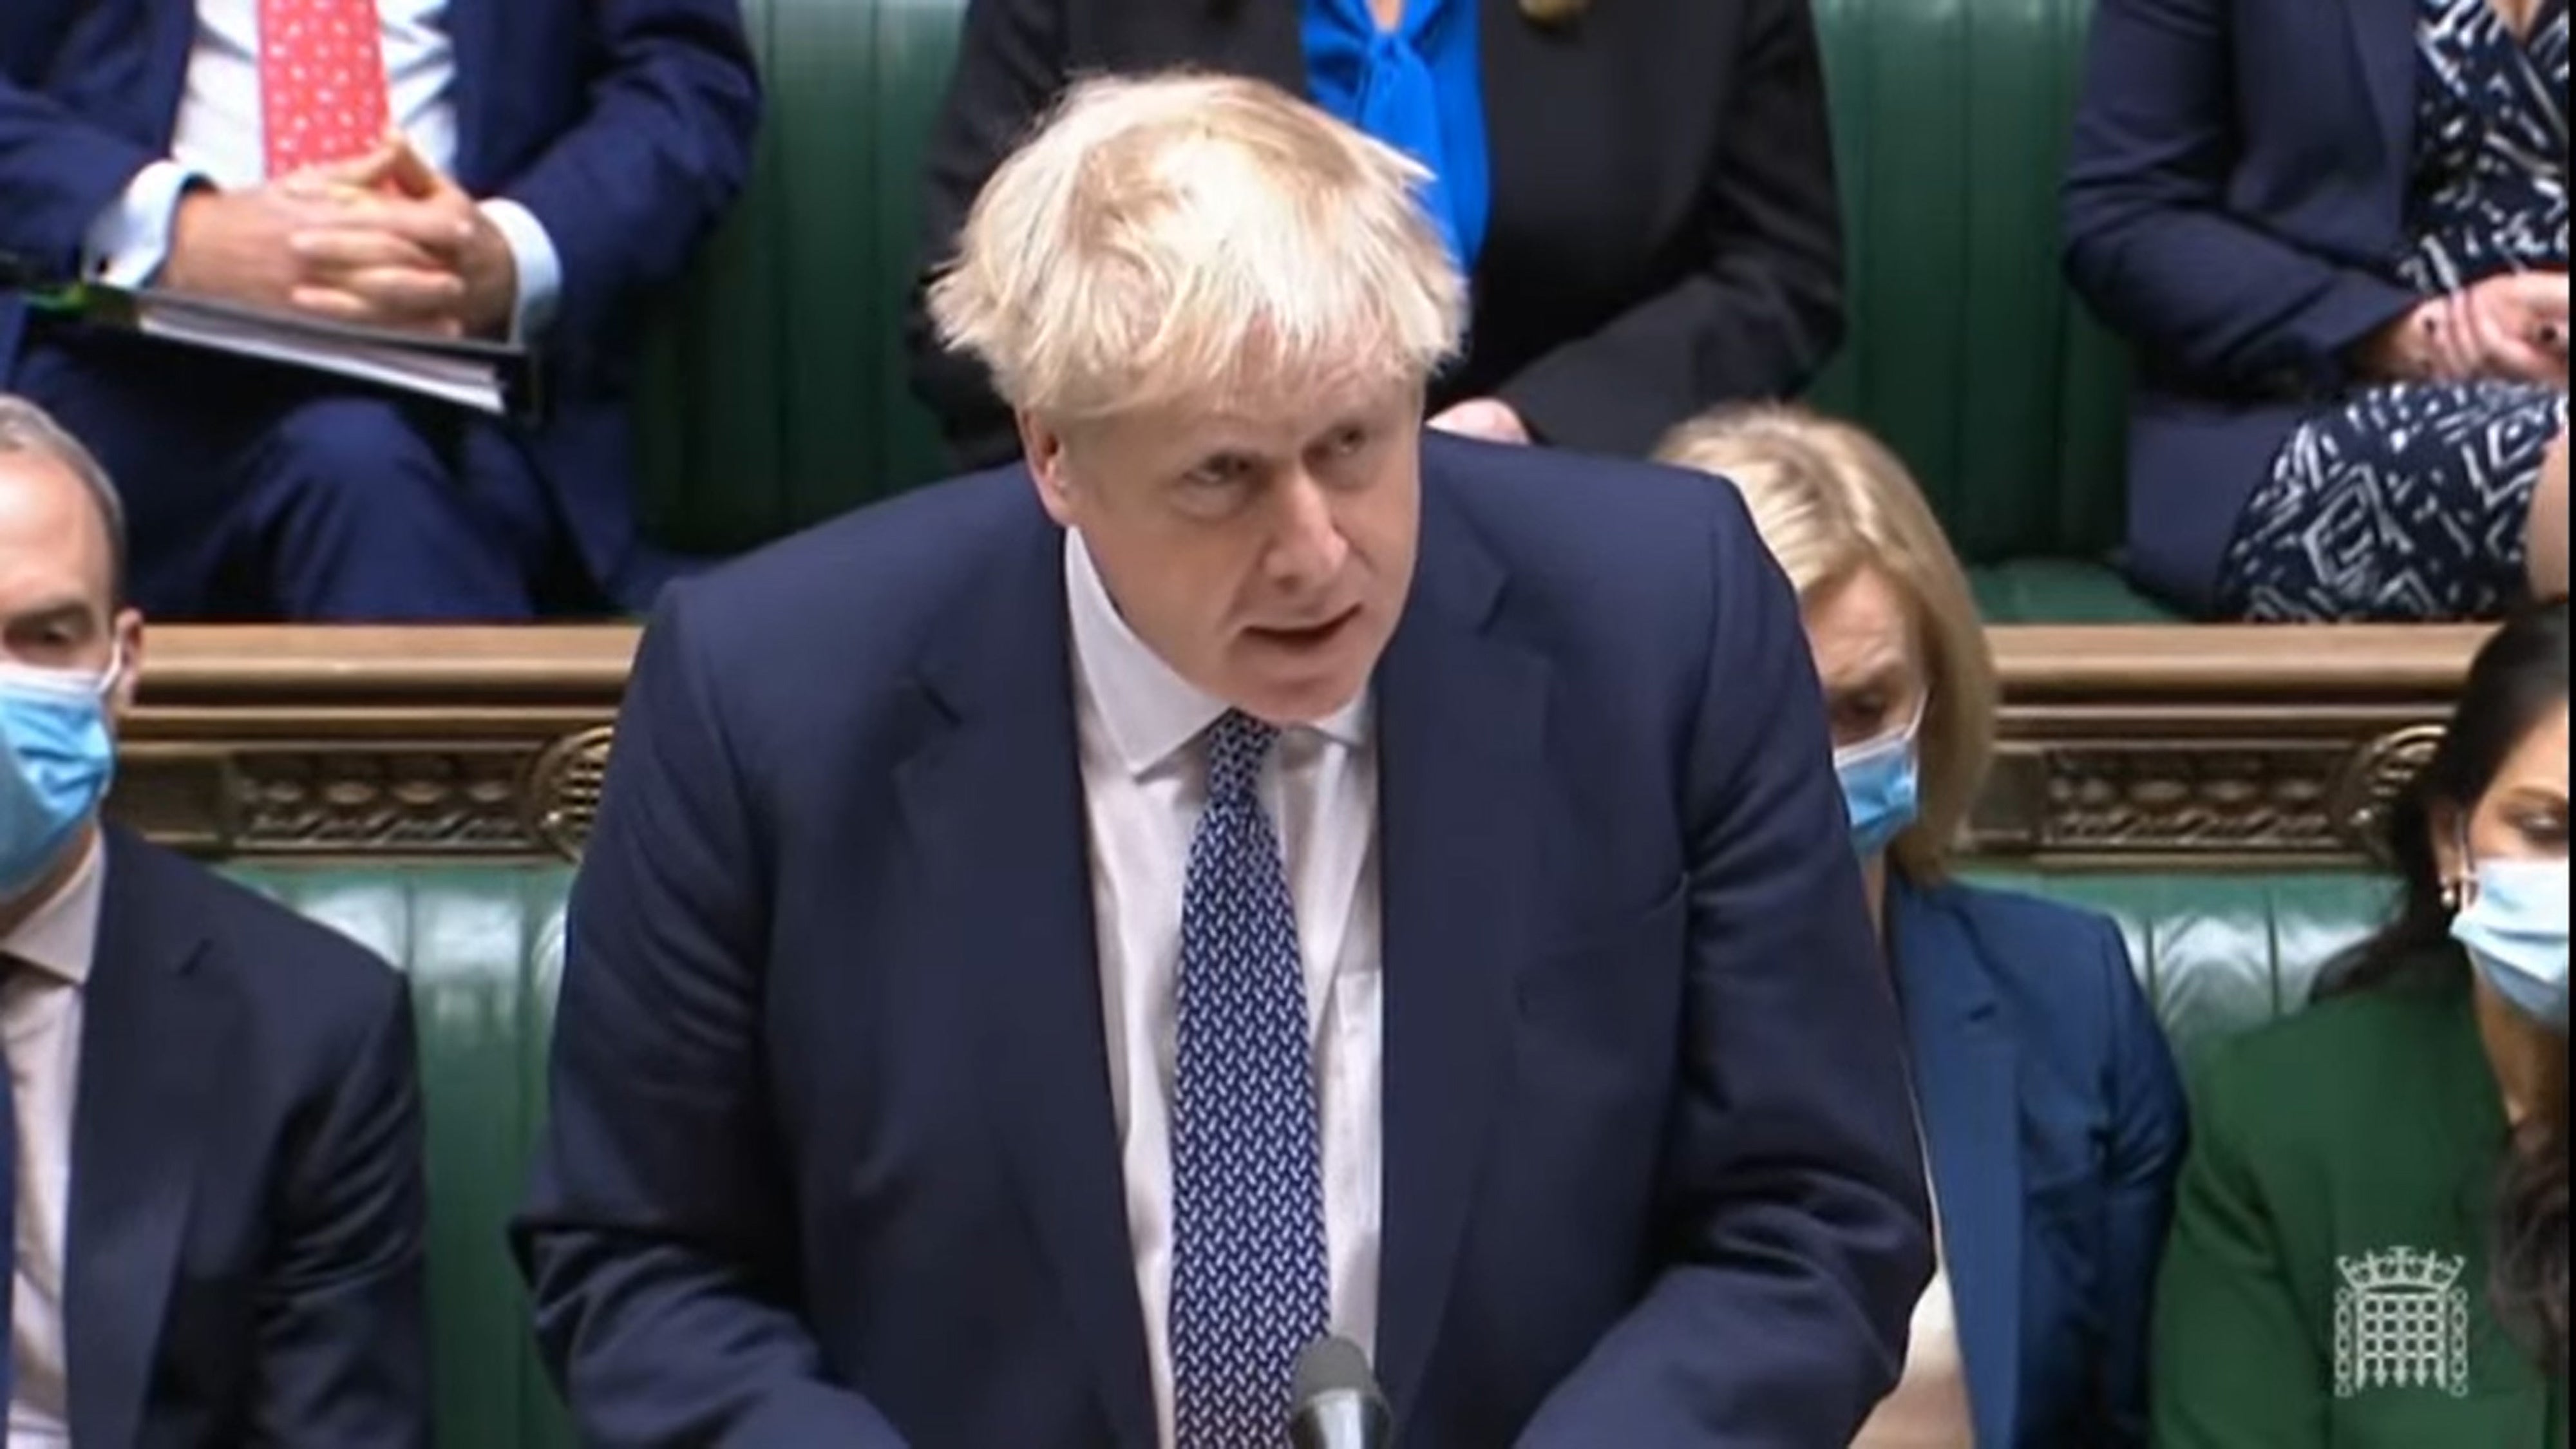 Mr Johnson apologised to the House (House of Commons)